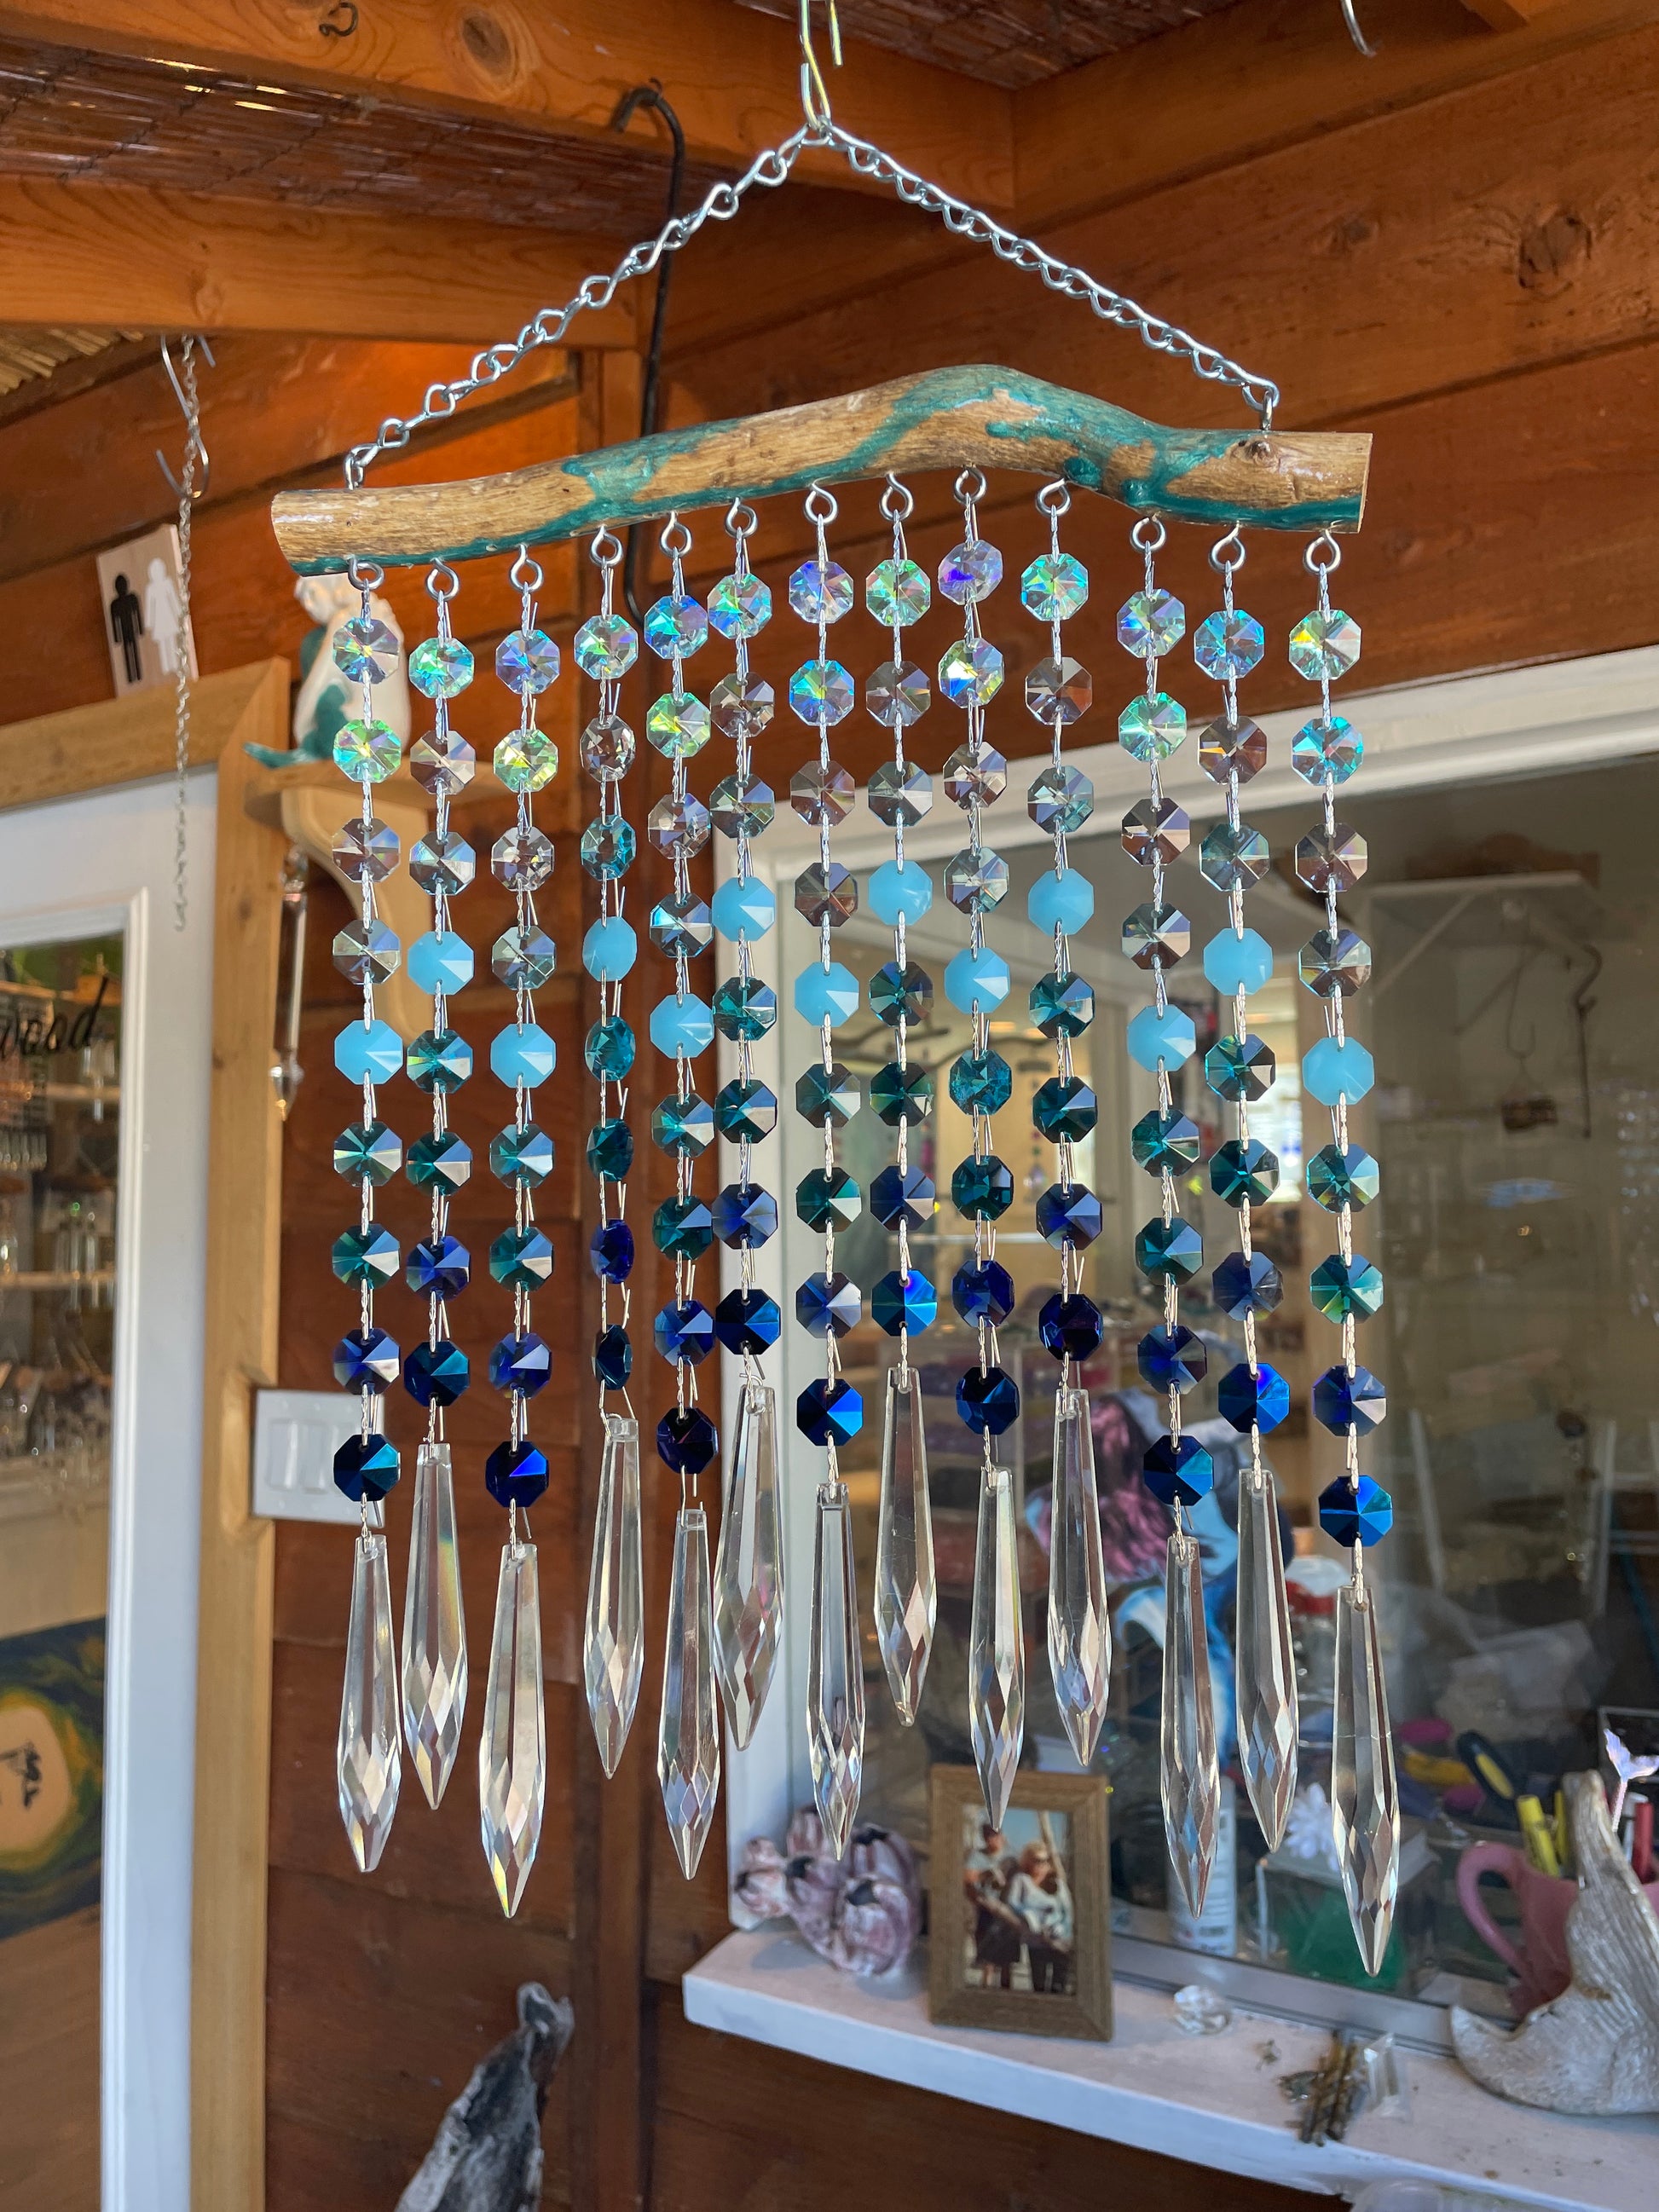 epoxy resin dazzling driftwood sun-catcher chandelier crystal hand made art unique gifts